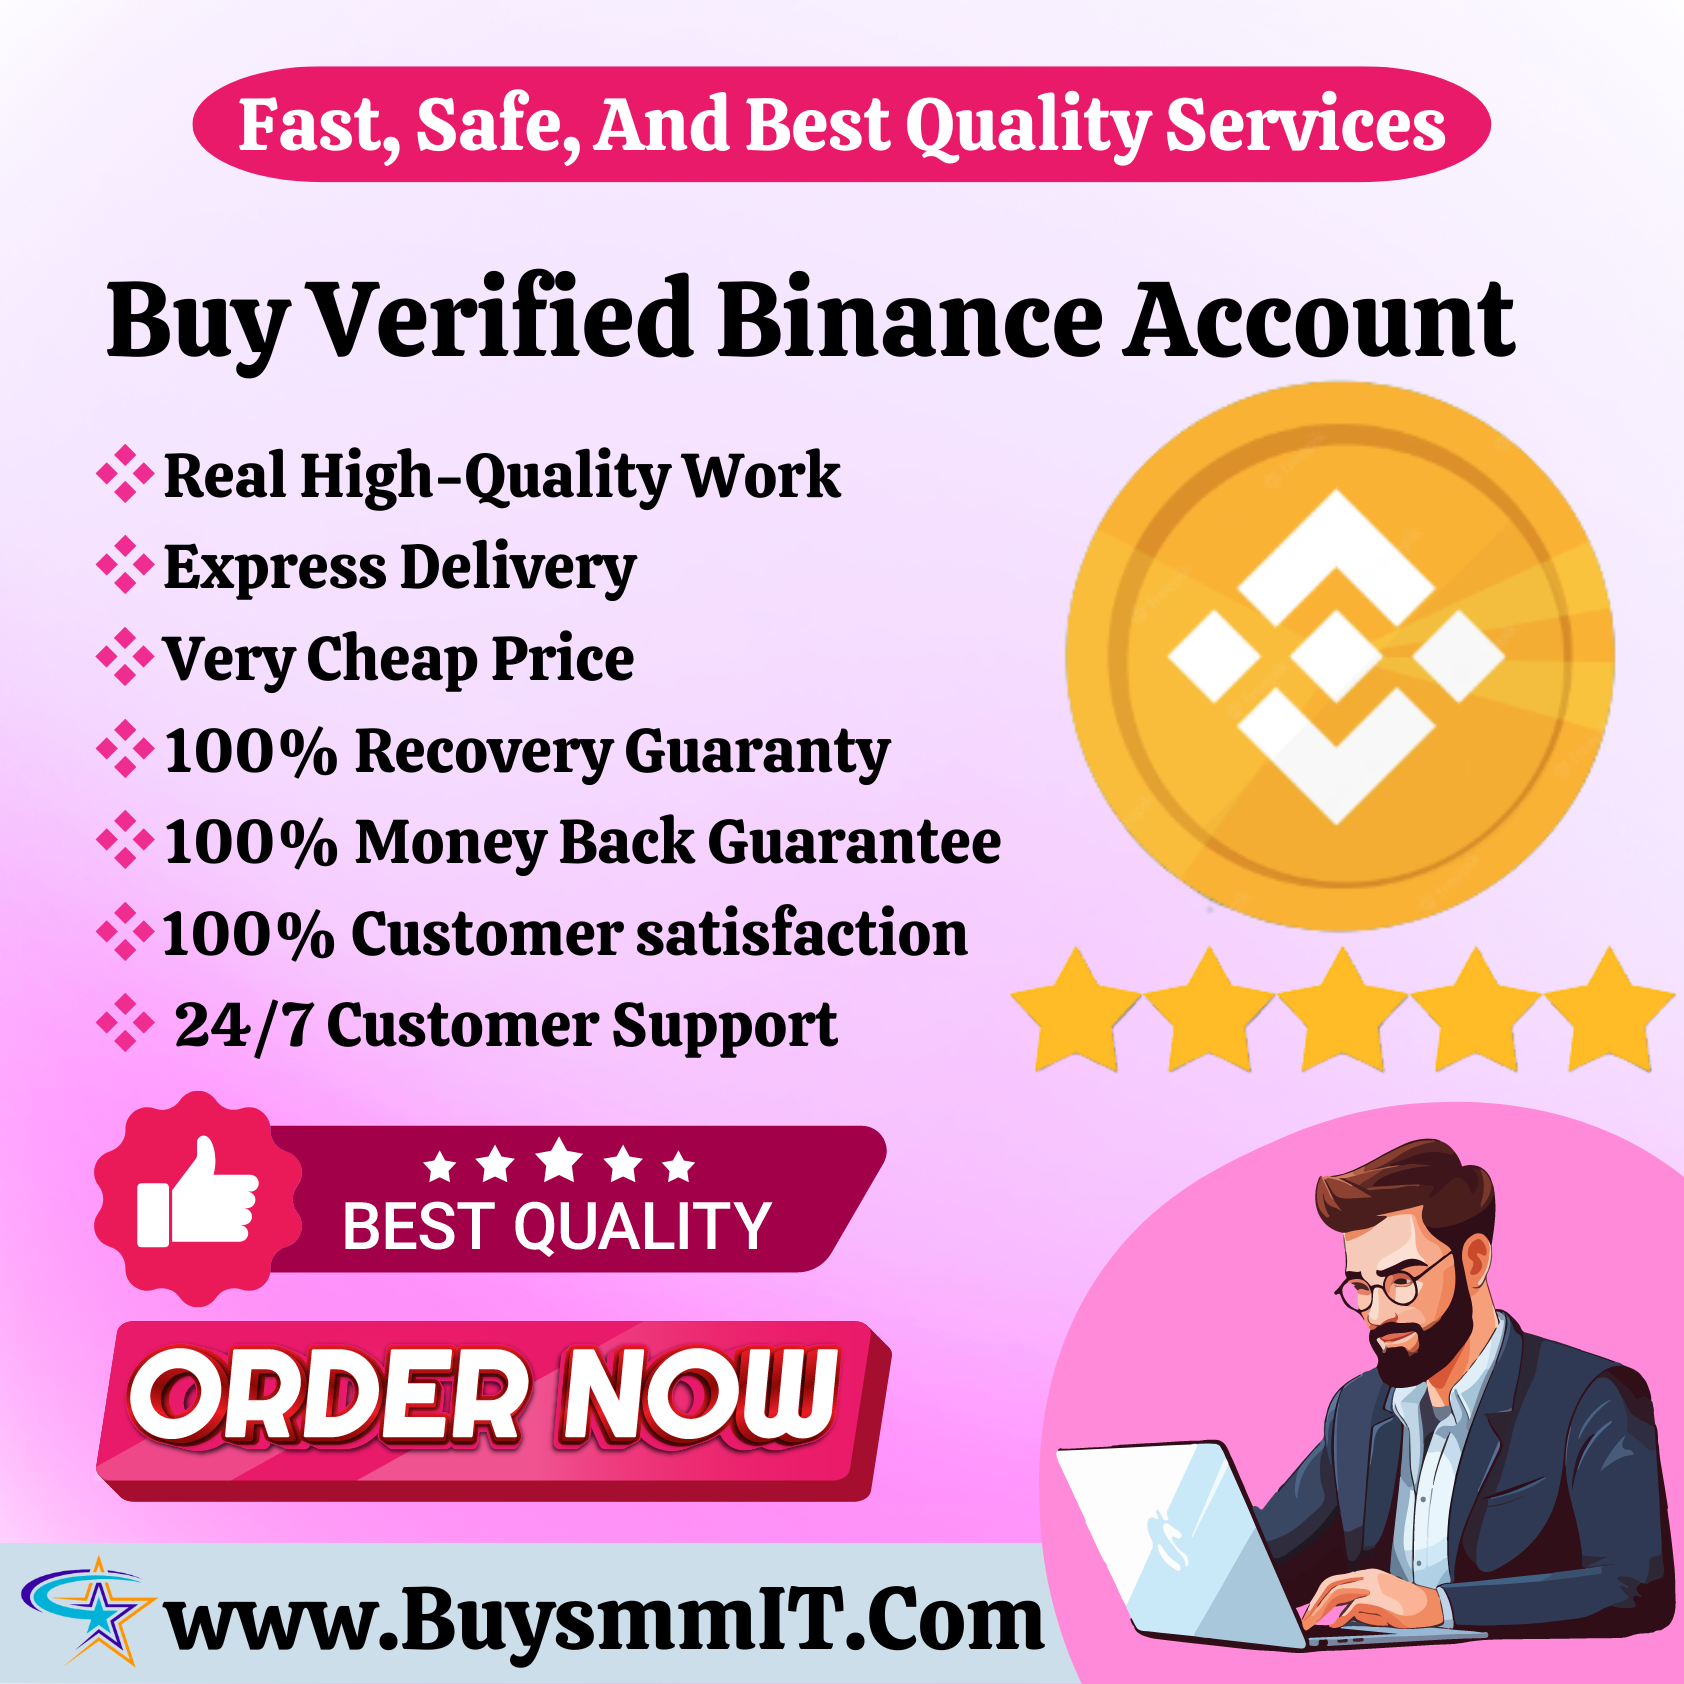 Buy Verified Binance Account - Secure For Your Business Needs